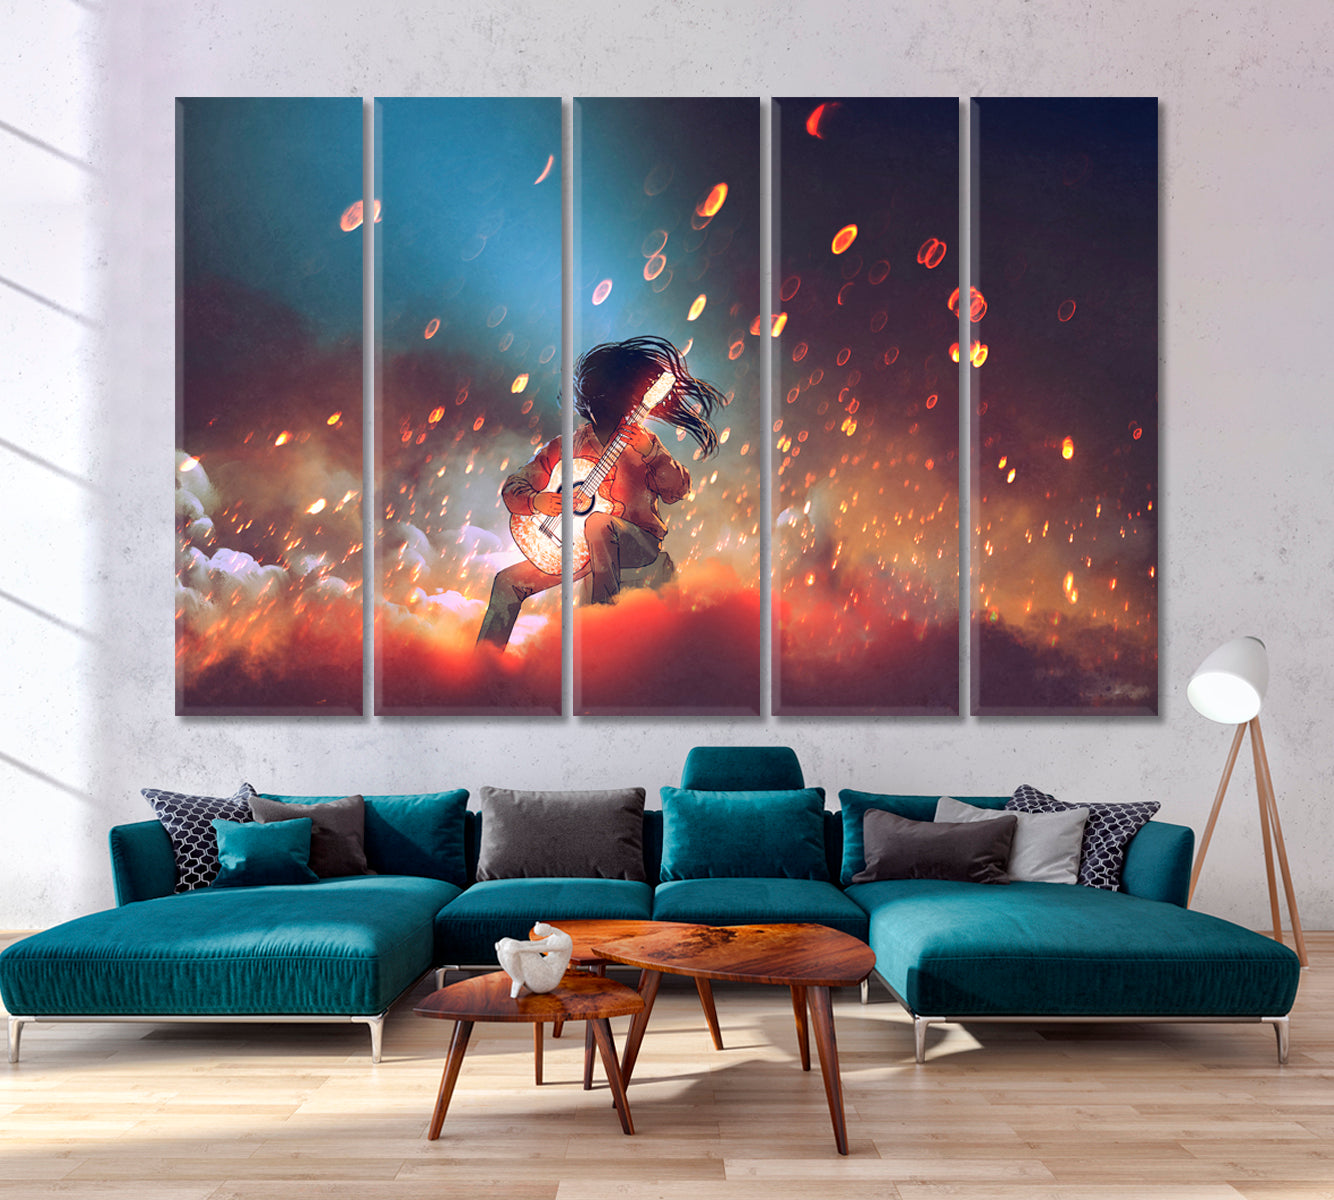 SURREAL Mysterious Man Playing the Glowing Guitar in the Smoke Surreal Fantasy Large Art Print Décor Artesty 5 panels 36" x 24" 